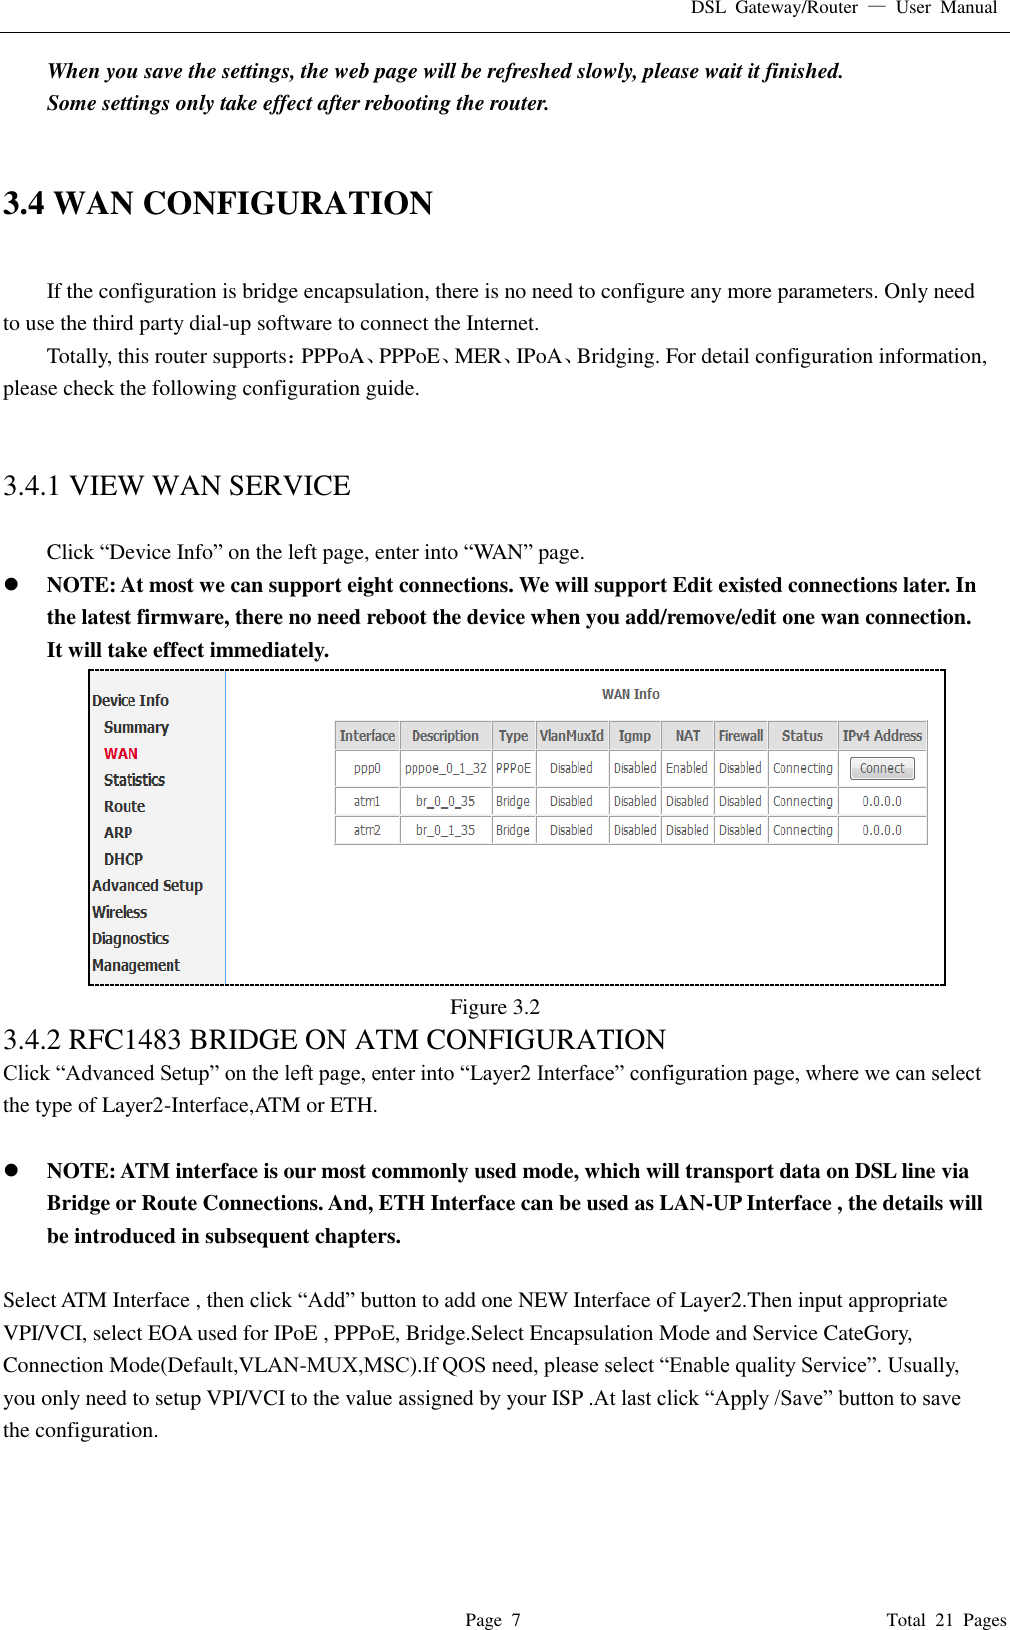 DSL  Gateway/Router  —  User  Manual   Page  7                                                                              Total  21  Pages When you save the settings, the web page will be refreshed slowly, please wait it finished. Some settings only take effect after rebooting the router.   3.4 WAN CONFIGURATION  If the configuration is bridge encapsulation, there is no need to configure any more parameters. Only need to use the third party dial-up software to connect the Internet.   Totally, this router supports：PPPoA、PPPoE、MER、IPoA、Bridging. For detail configuration information, please check the following configuration guide.   3.4.1 VIEW WAN SERVICE    Click “Device Info” on the left page, enter into “WAN” page.  NOTE: At most we can support eight connections. We will support Edit existed connections later. In the latest firmware, there no need reboot the device when you add/remove/edit one wan connection. It will take effect immediately.  Figure 3.2 3.4.2 RFC1483 BRIDGE ON ATM CONFIGURATION   Click “Advanced Setup” on the left page, enter into “Layer2 Interface” configuration page, where we can select the type of Layer2-Interface,ATM or ETH.   NOTE: ATM interface is our most commonly used mode, which will transport data on DSL line via Bridge or Route Connections. And, ETH Interface can be used as LAN-UP Interface , the details will be introduced in subsequent chapters.  Select ATM Interface , then click “Add” button to add one NEW Interface of Layer2.Then input appropriate VPI/VCI, select EOA used for IPoE , PPPoE, Bridge.Select Encapsulation Mode and Service CateGory, Connection Mode(Default,VLAN-MUX,MSC).If QOS need, please select “Enable quality Service”. Usually, you only need to setup VPI/VCI to the value assigned by your ISP .At last click “Apply /Save” button to save the configuration. 